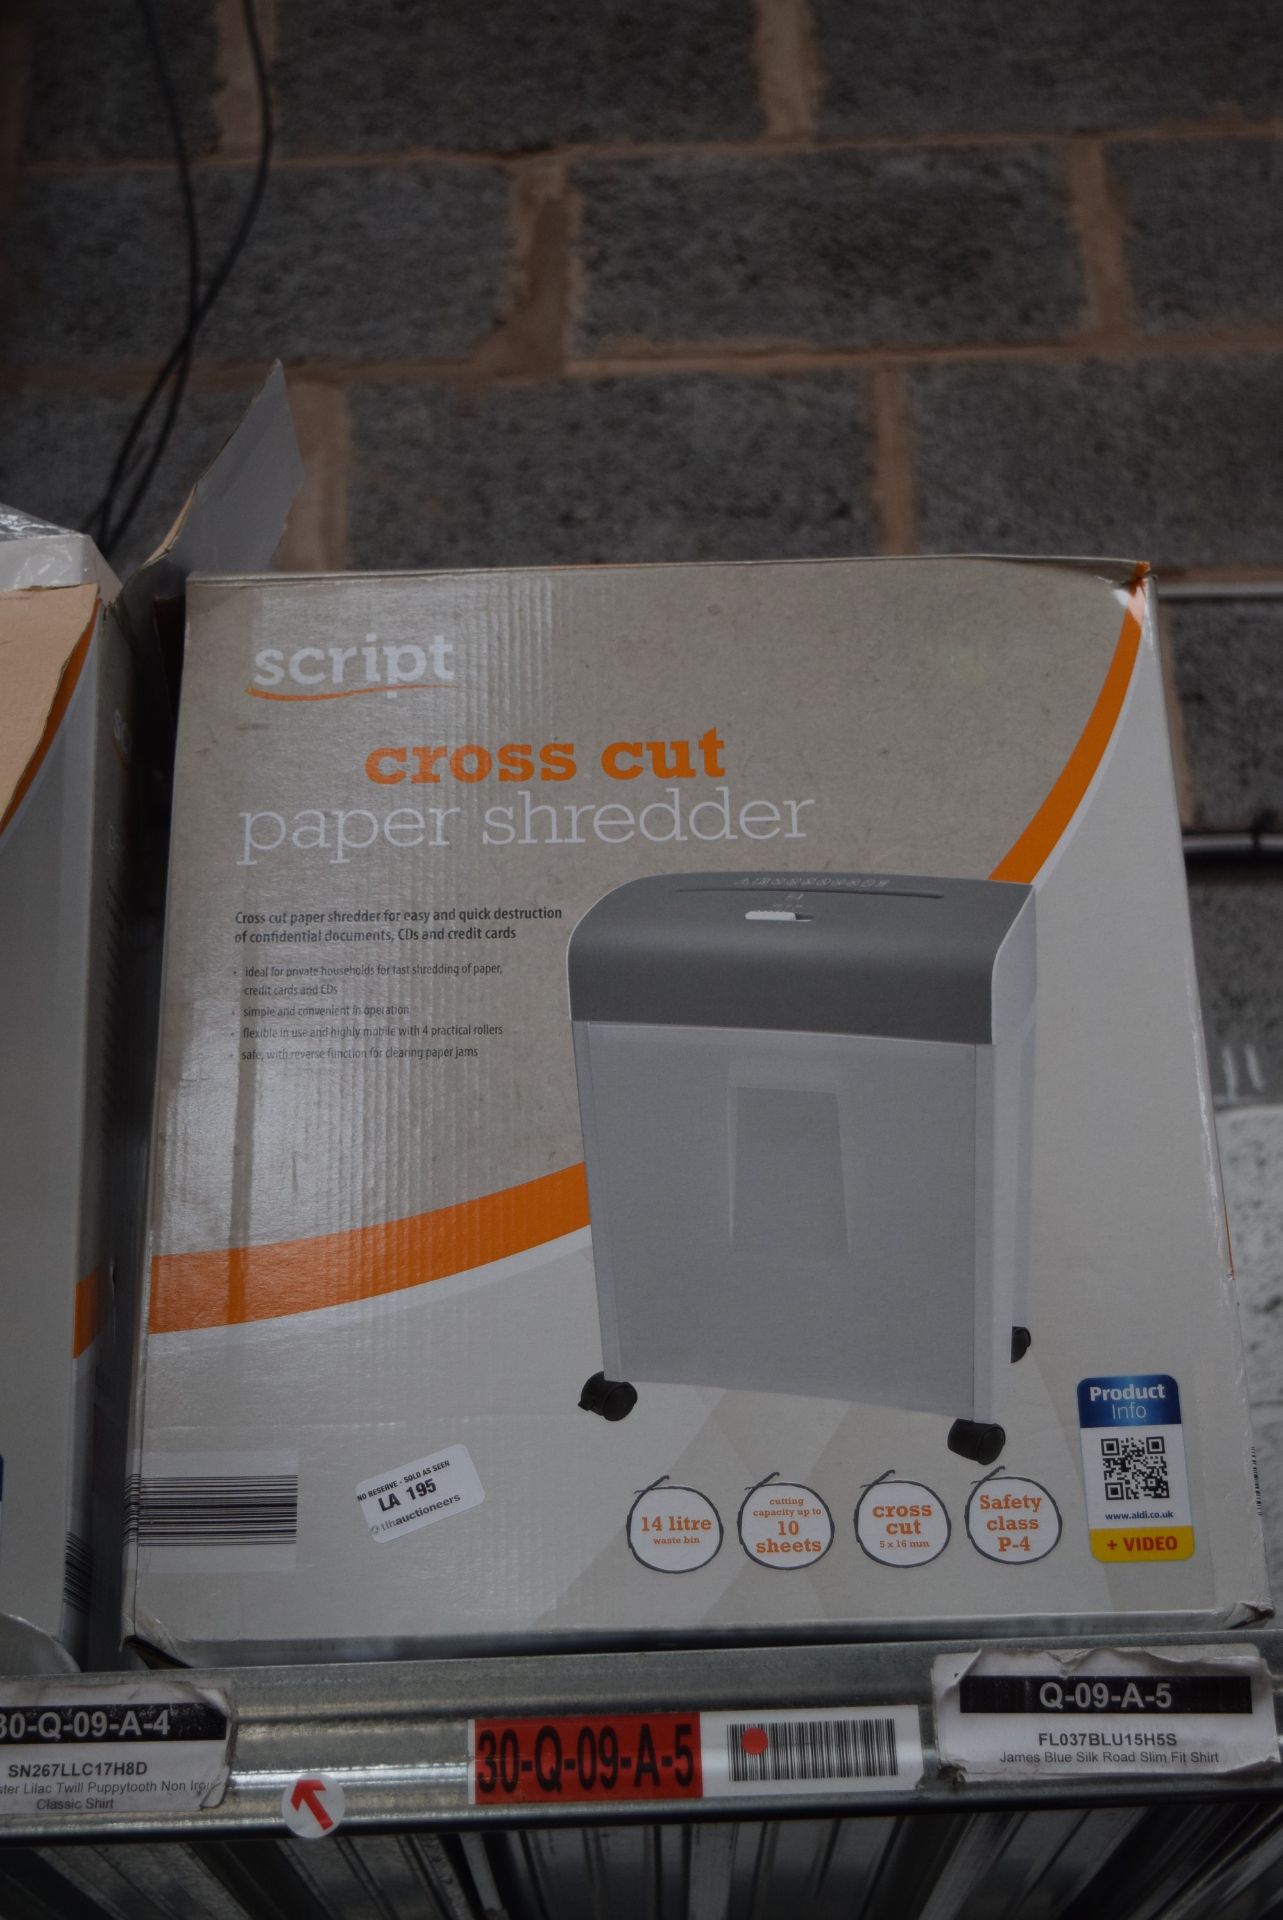 1 X BOXED SCRIPT CROSS CUT PAPER SHREDDER WITH UP TO 14L WASTE BIN RRP £20